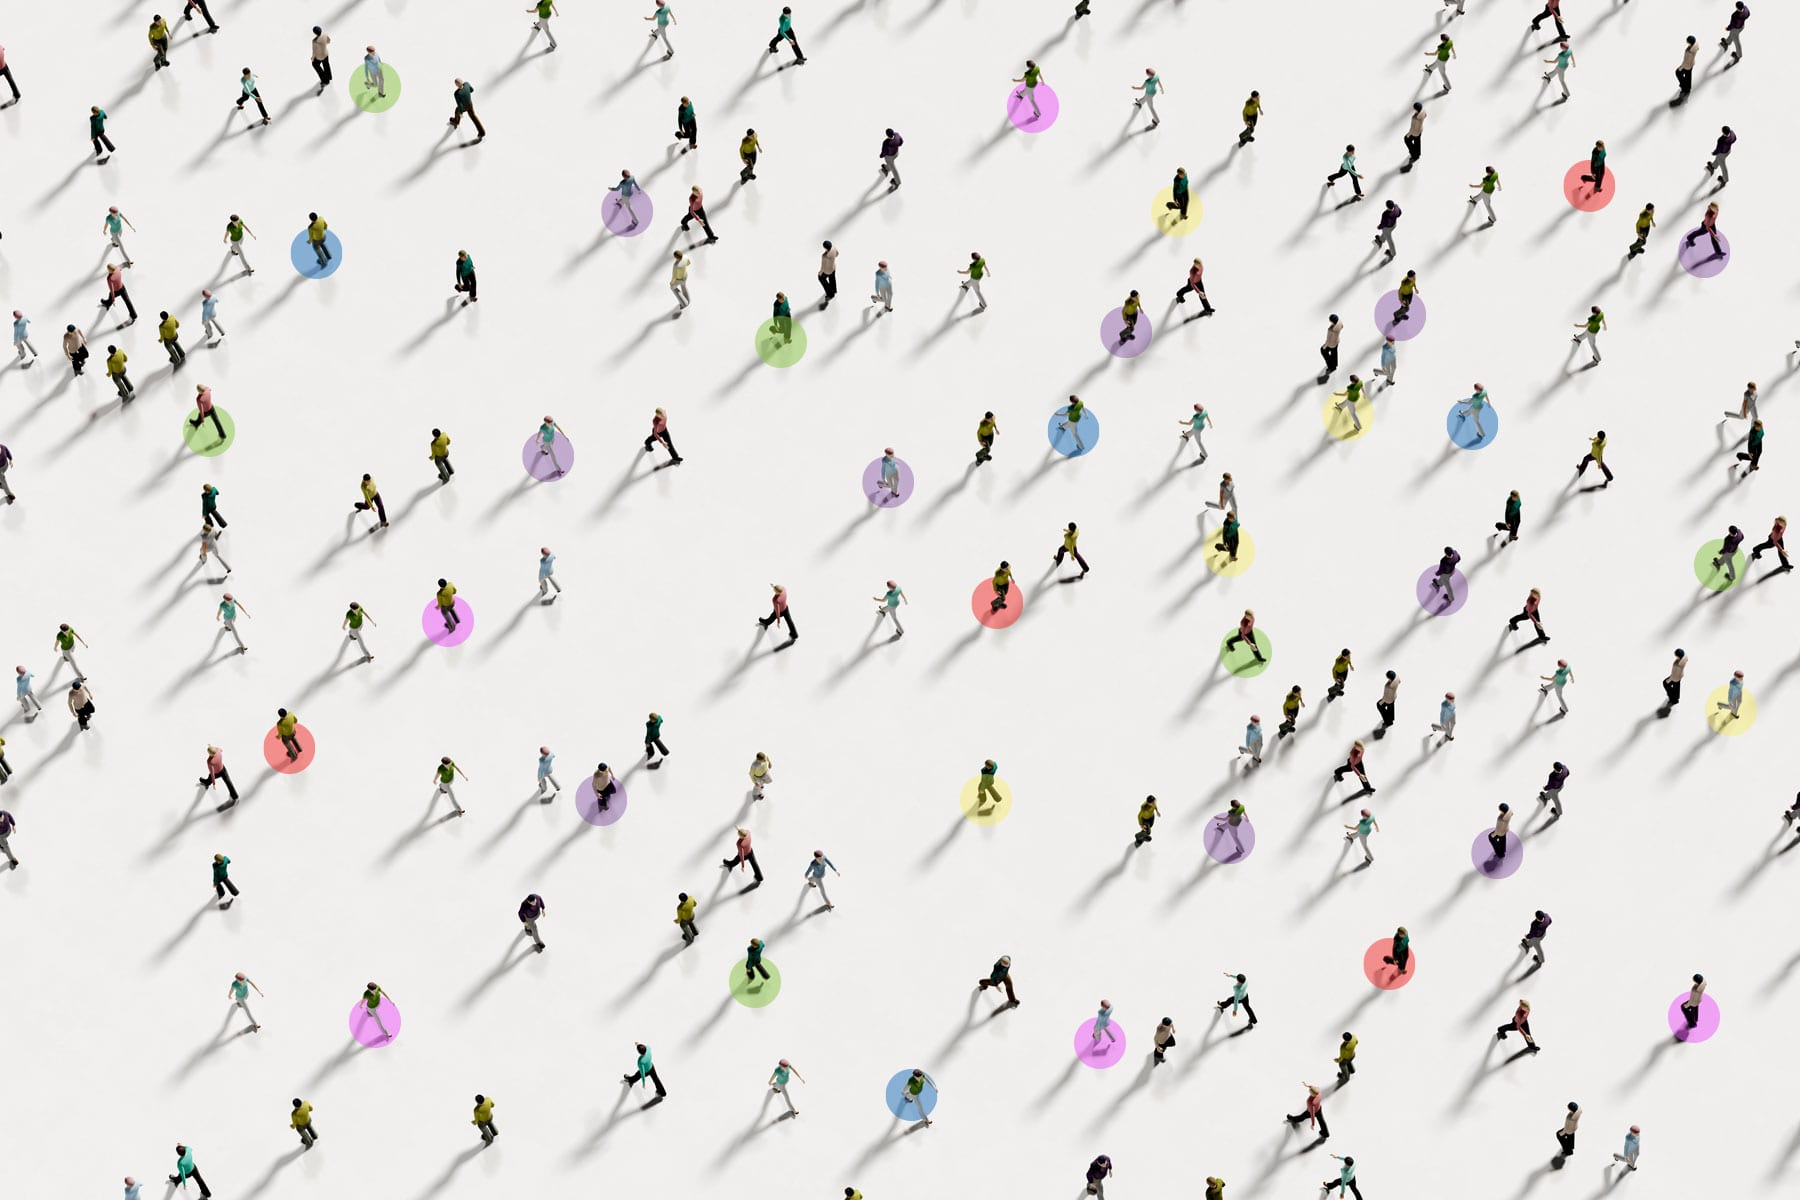 An illustration of people walking with colored dots on them.